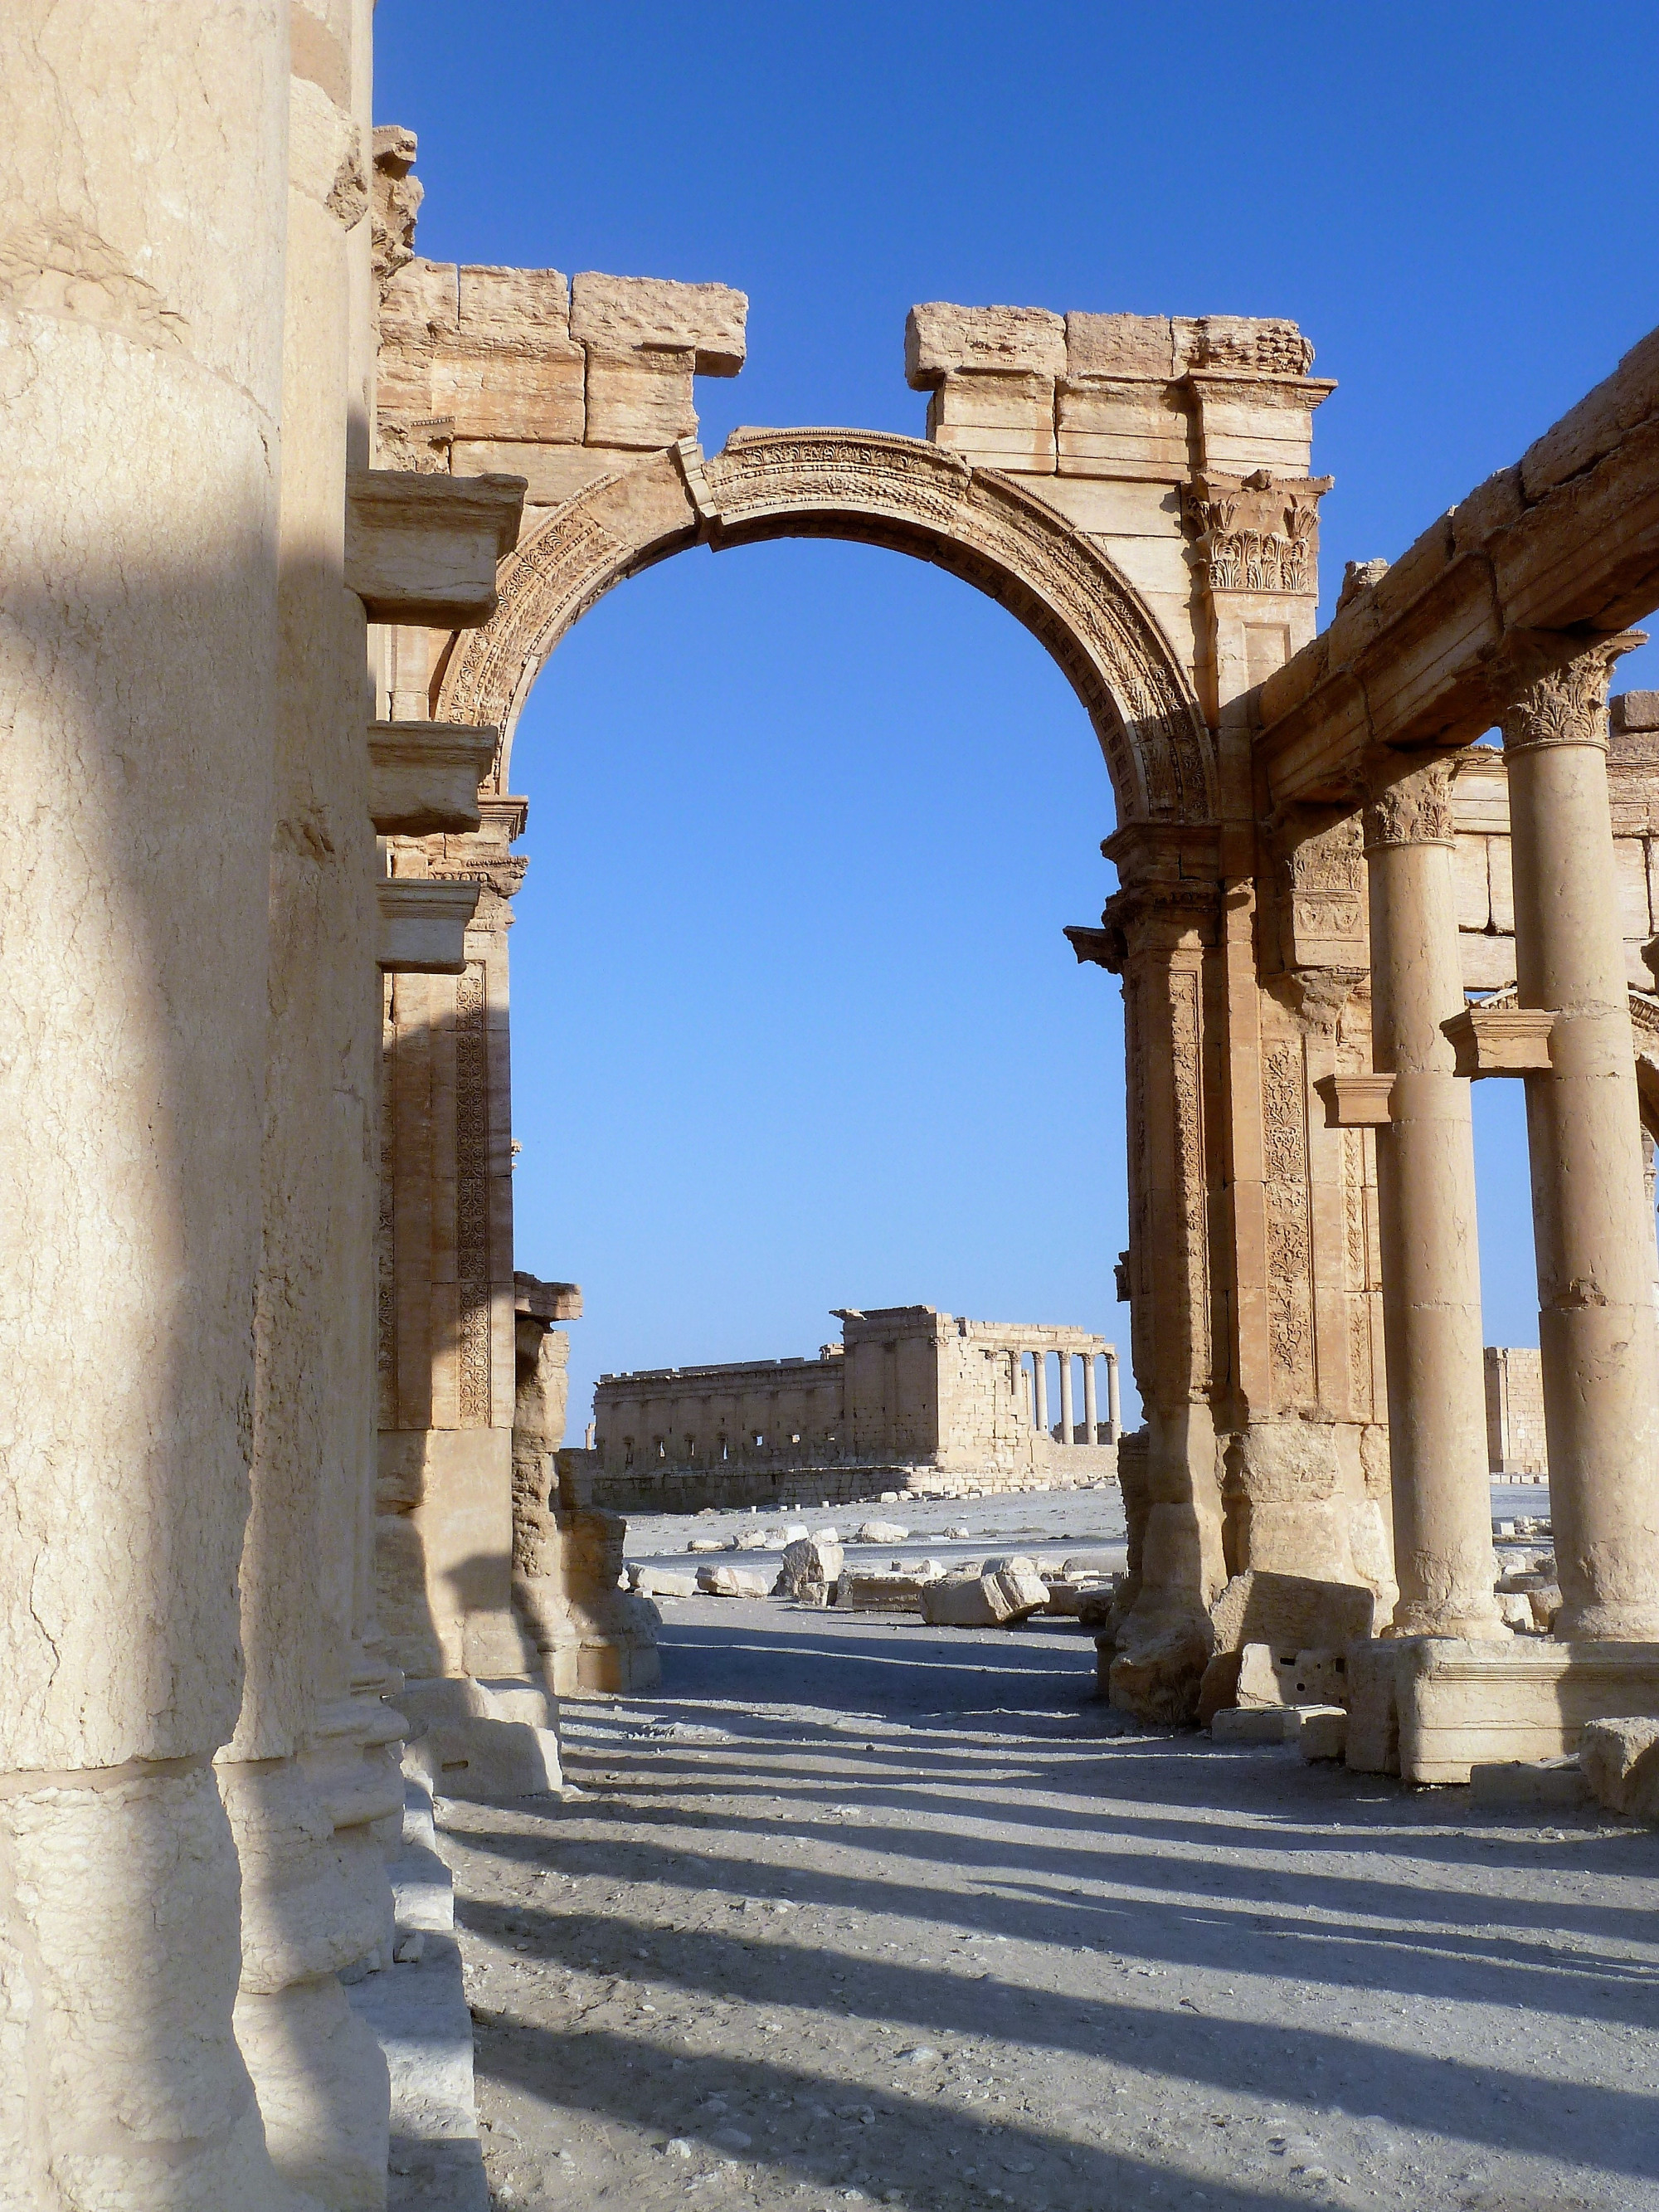 Temple of bel viewed through the Arch